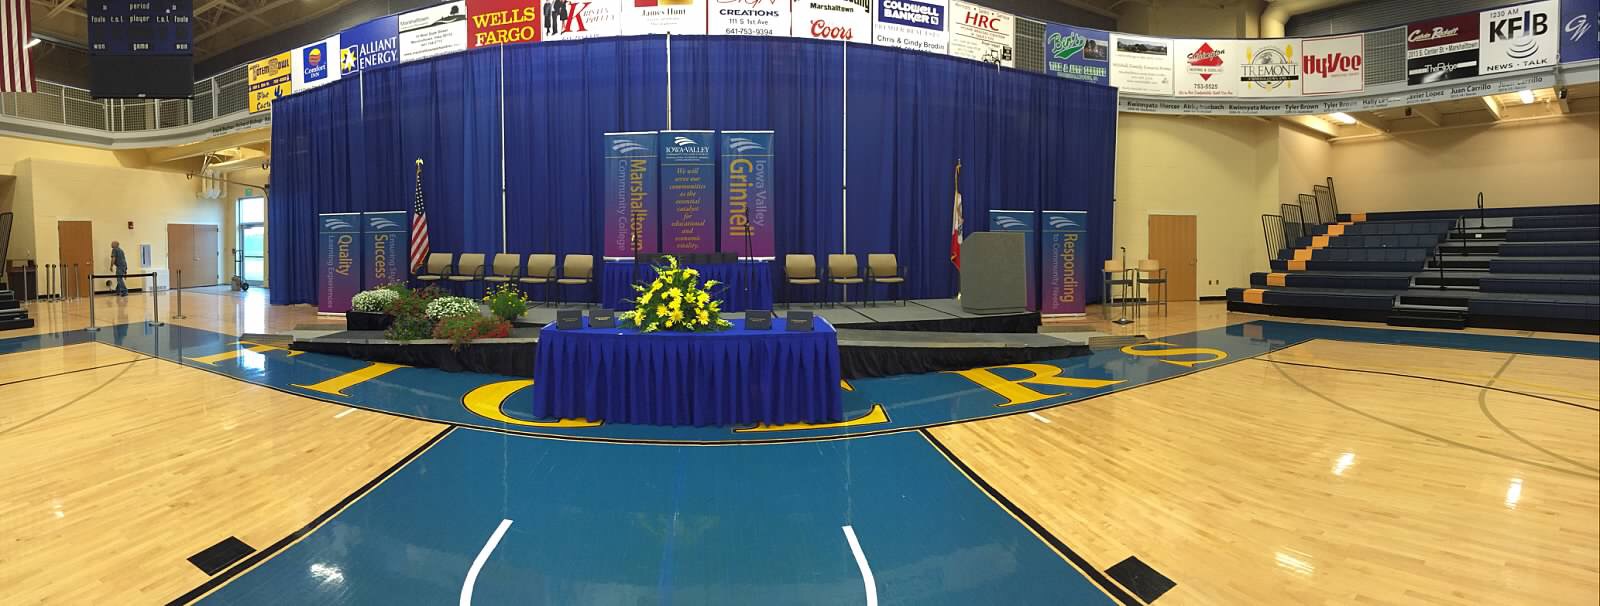 Graduation Set-Up at Iowa Valley Community College in the Gym with access ramps